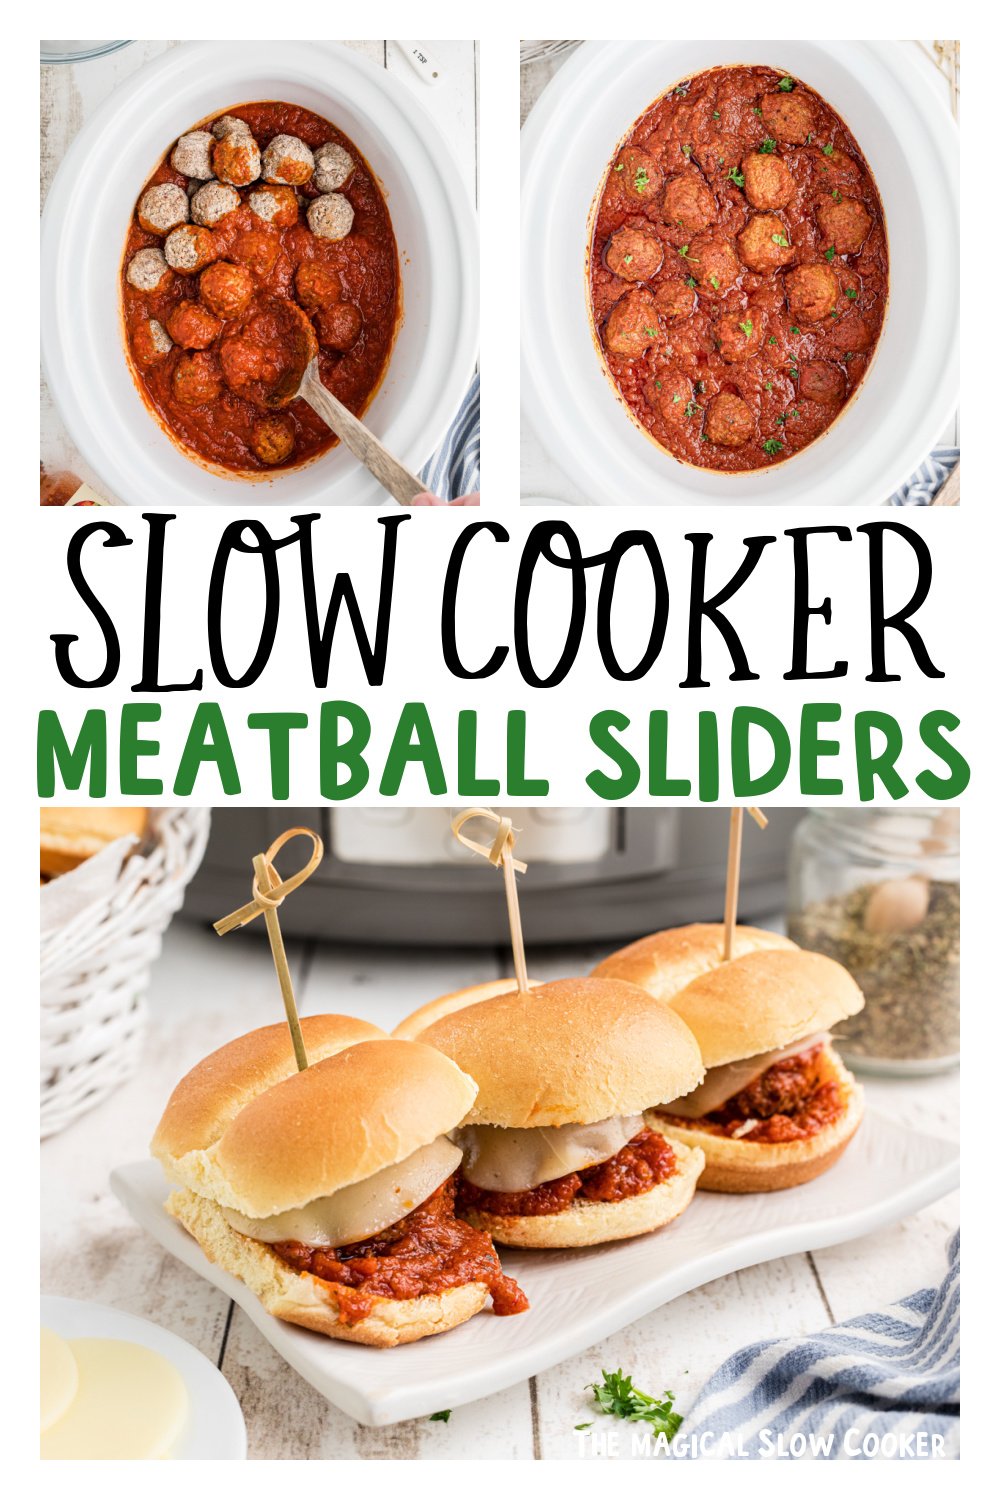 three images of slow cooker meatball sliders for pinterest.